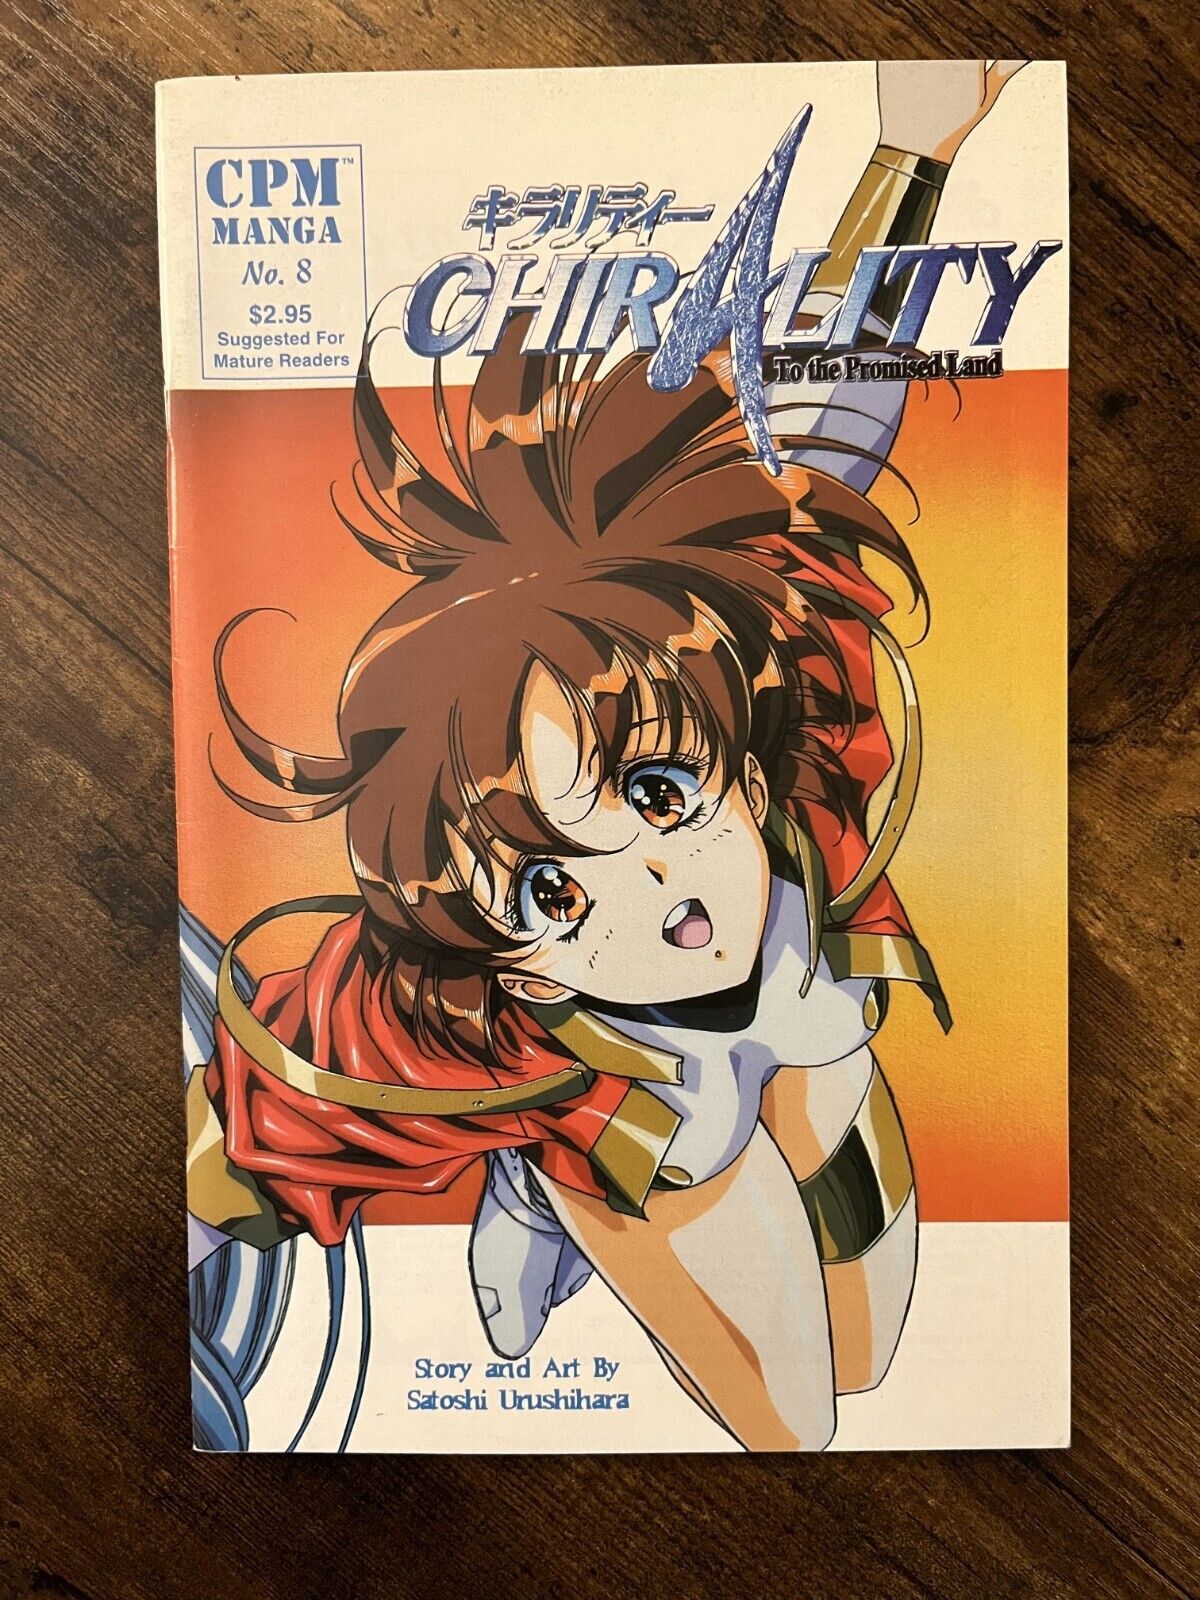 Chirality To The Promised Land #8 CPM Manga (1997) 7.0 FN/VF Anime